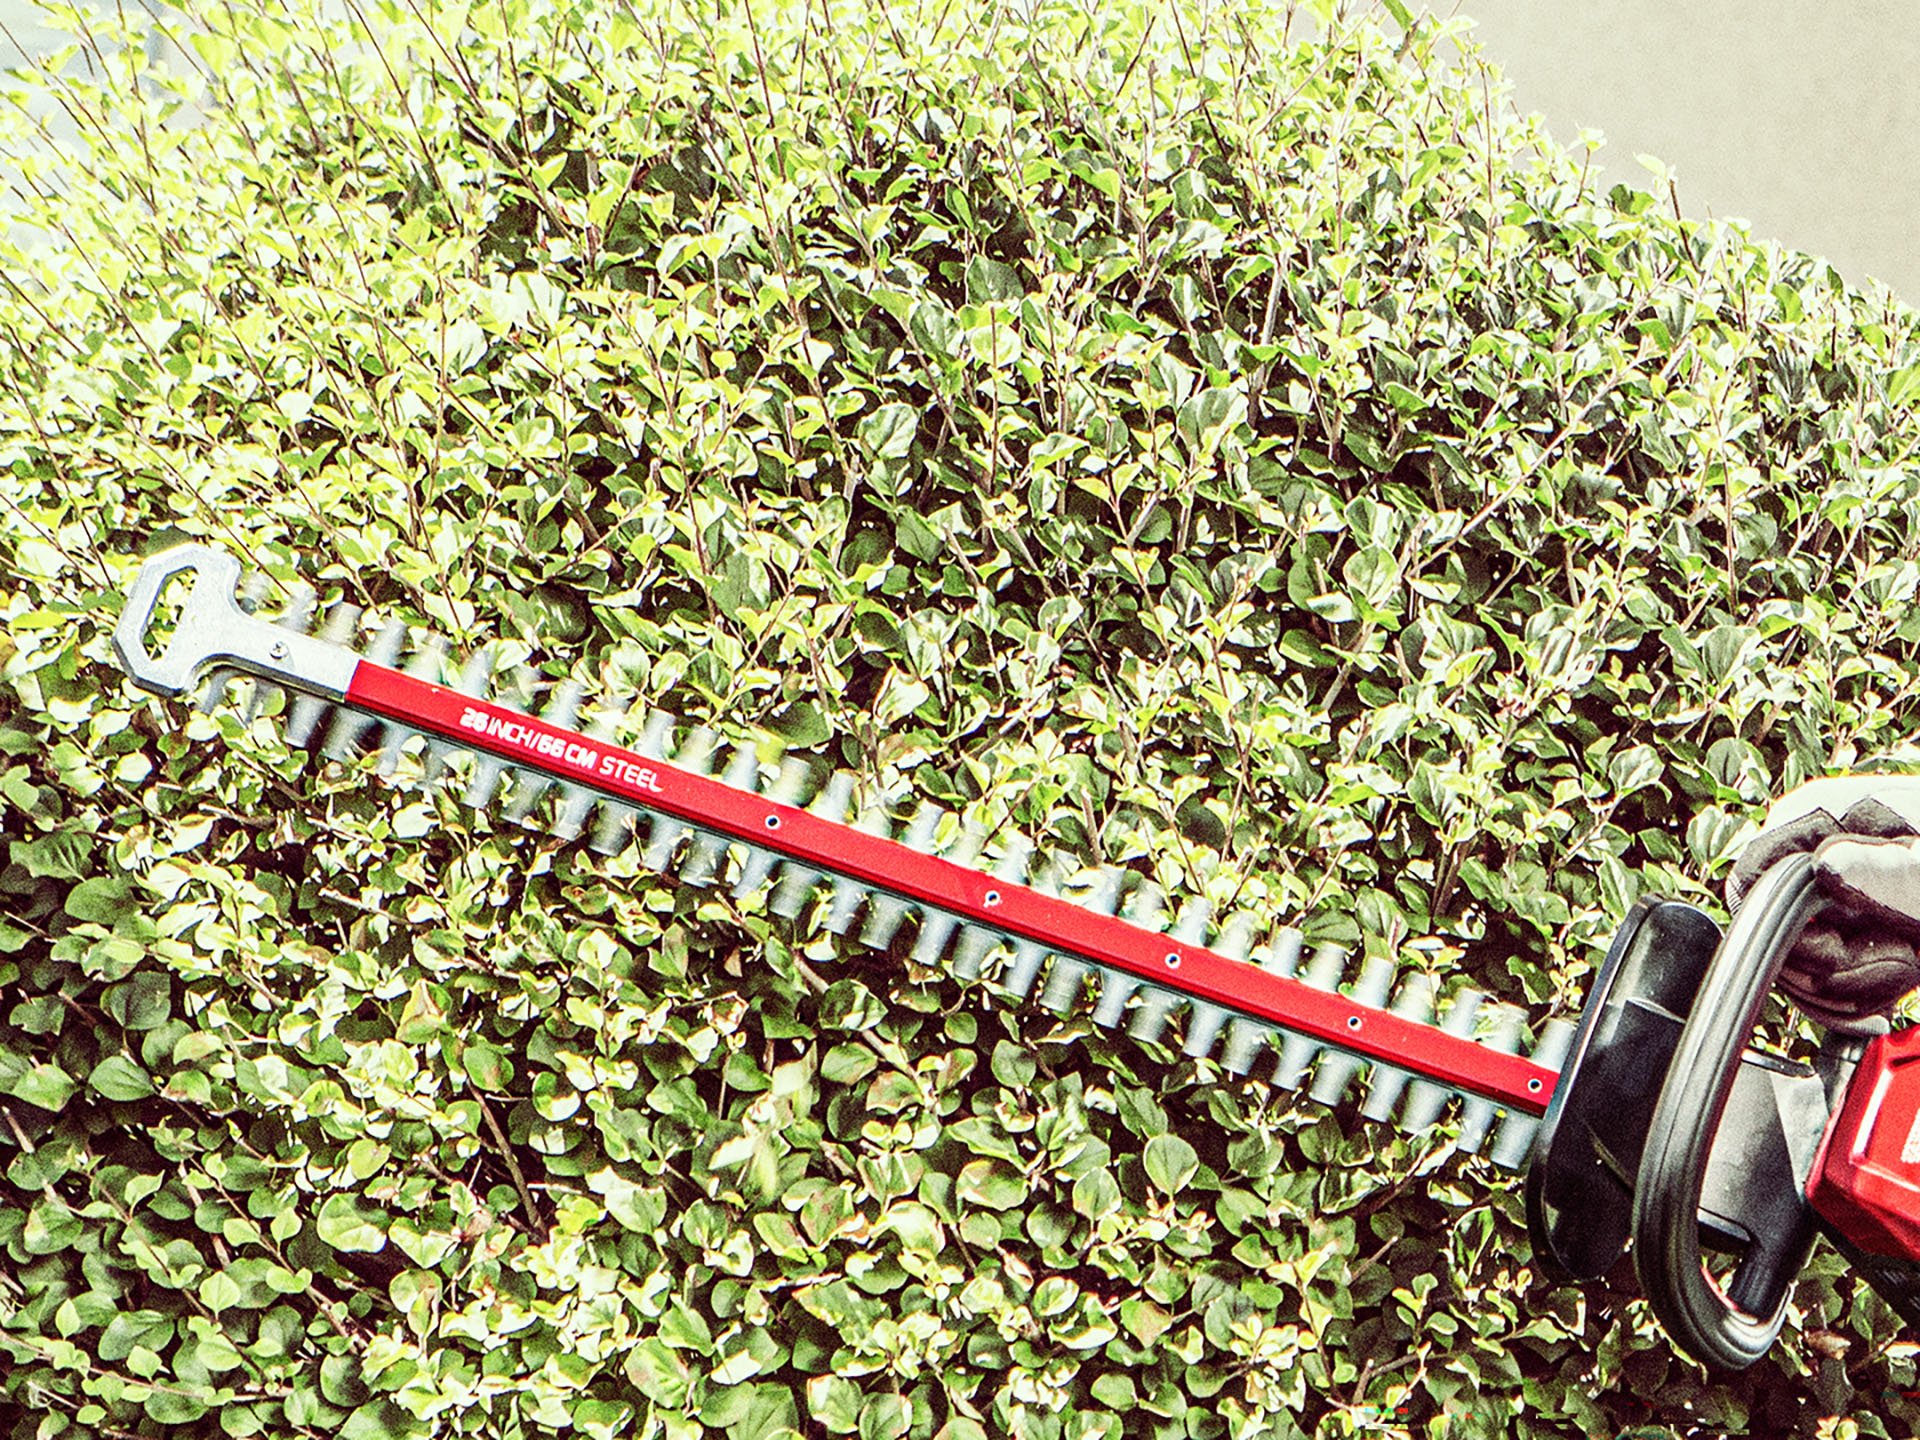 Snapper 82V Max Lithium-Ion Cordless Hedge Trimmer in Fond Du Lac, Wisconsin - Photo 6